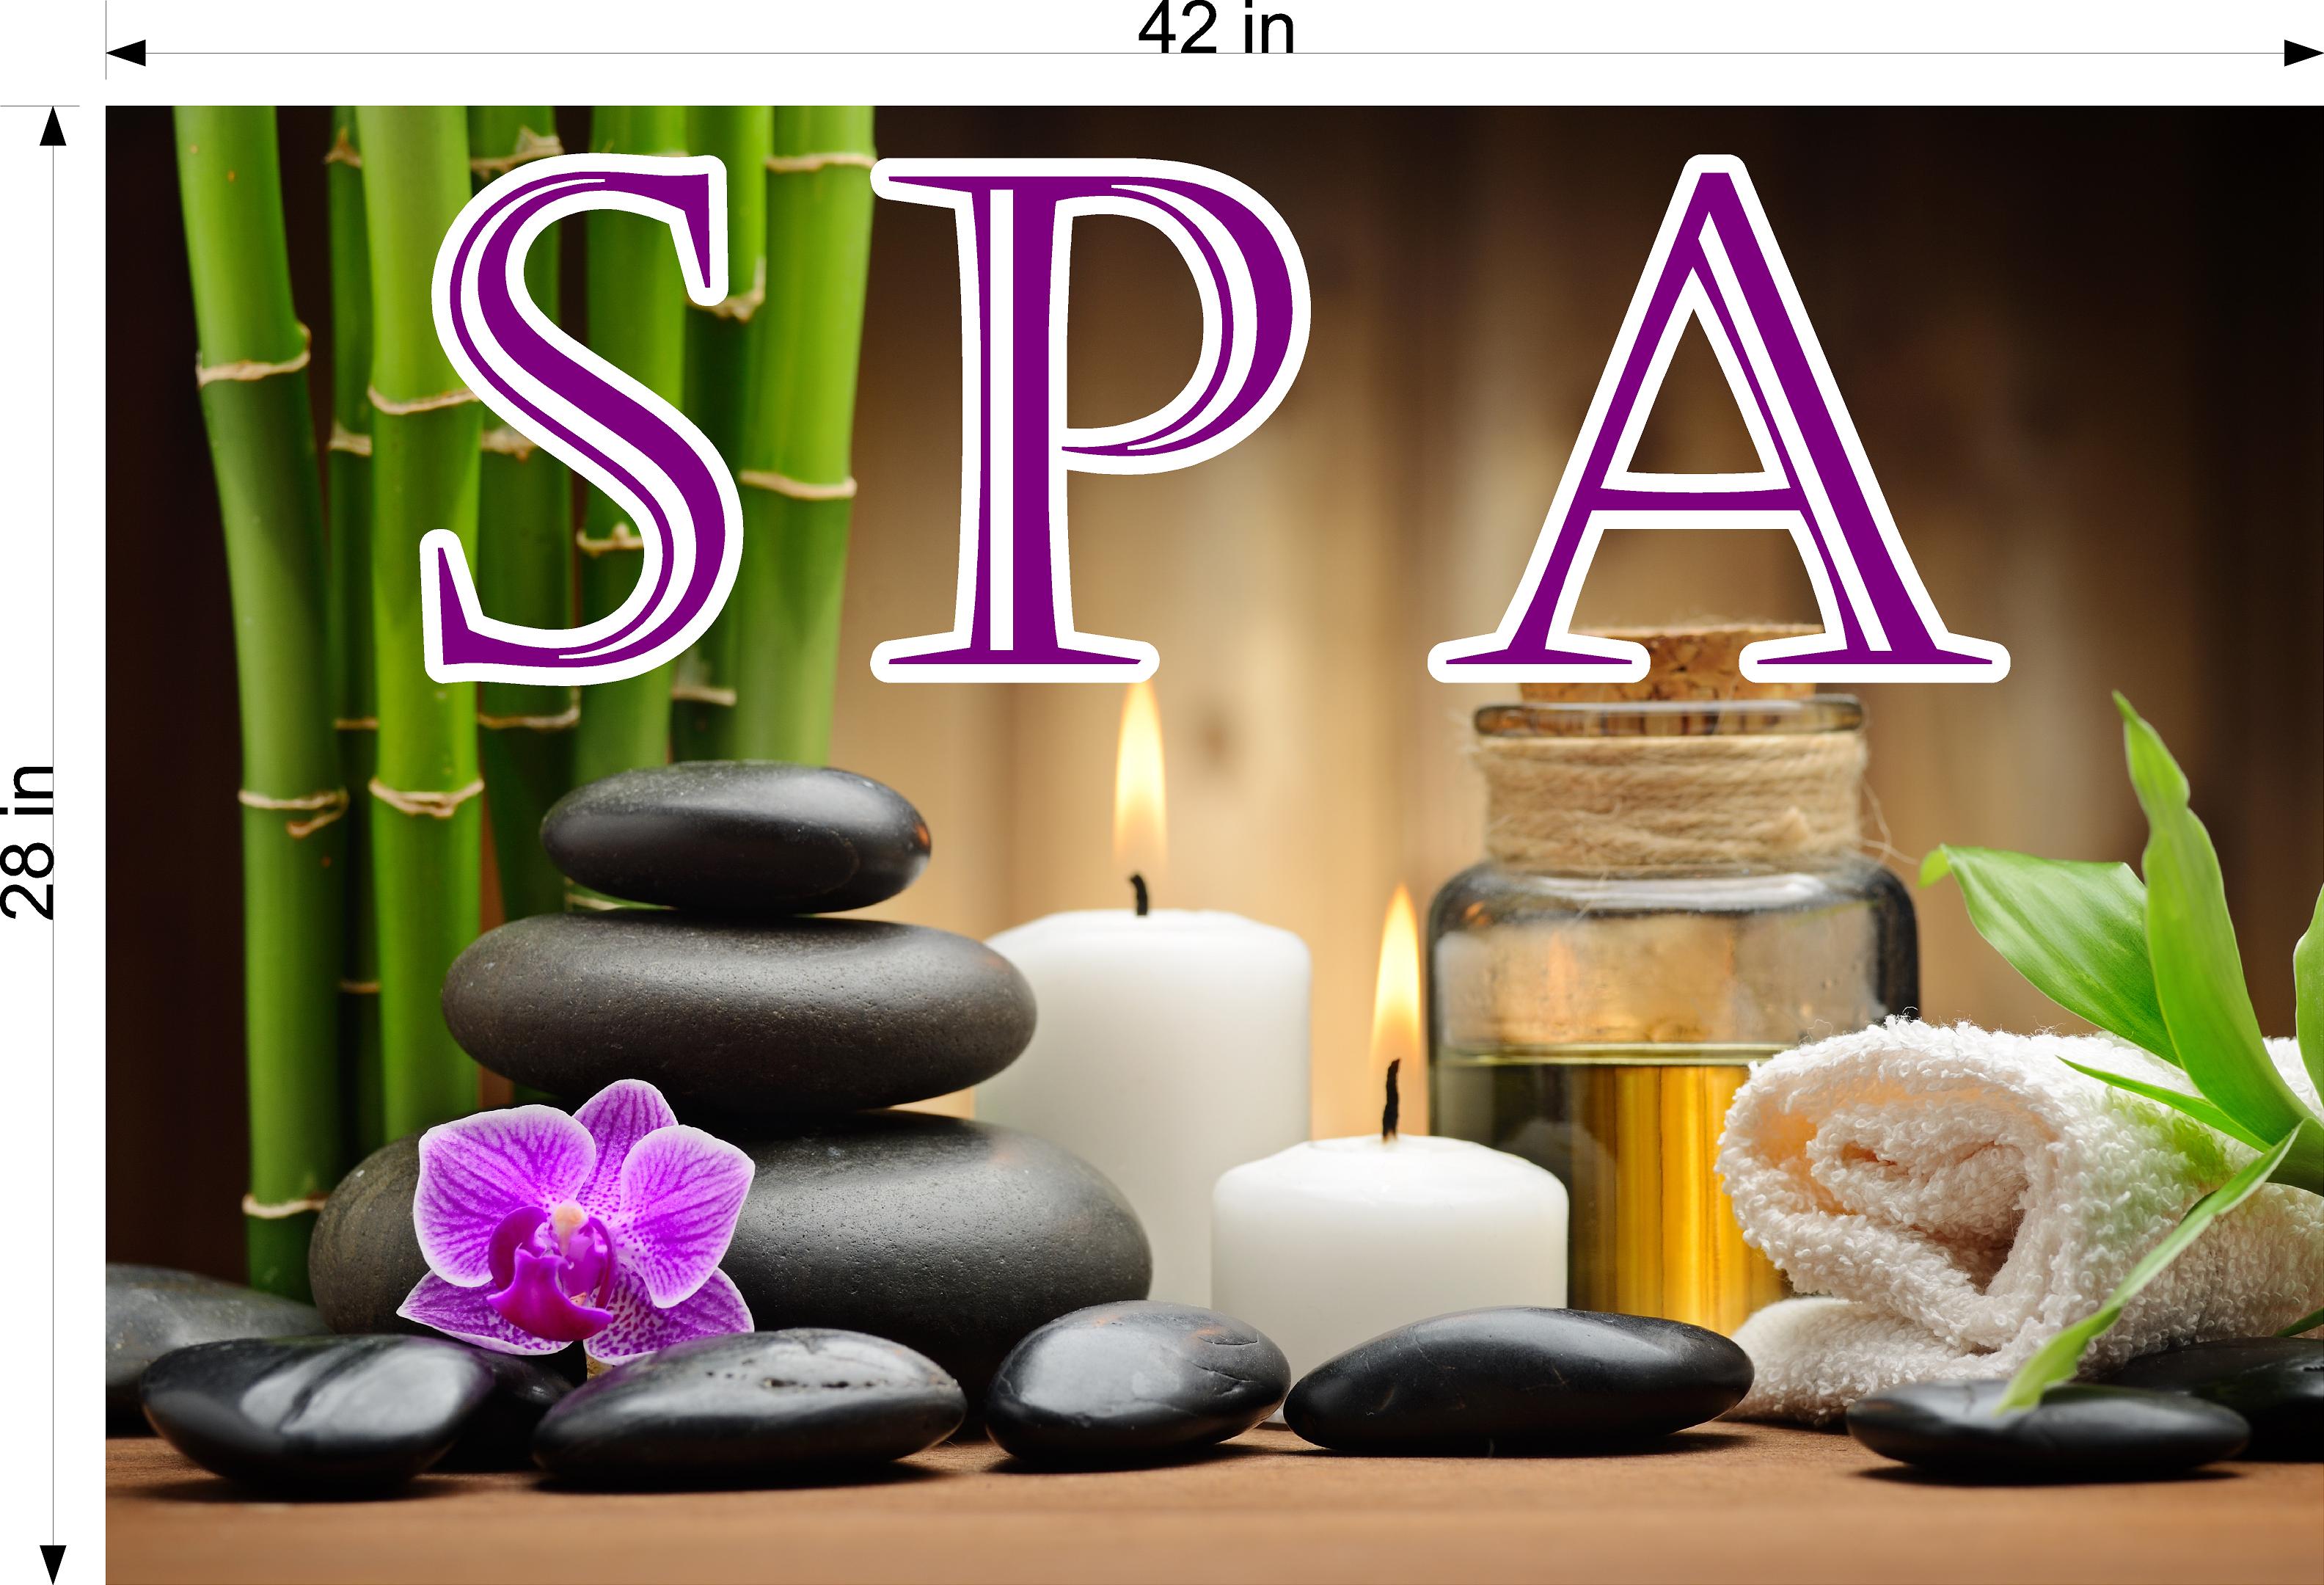 Spa 10 Wallpaper Poster Decal with Adhesive Backing Wall Sticker Decor Indoors Interior Sign Horizontal